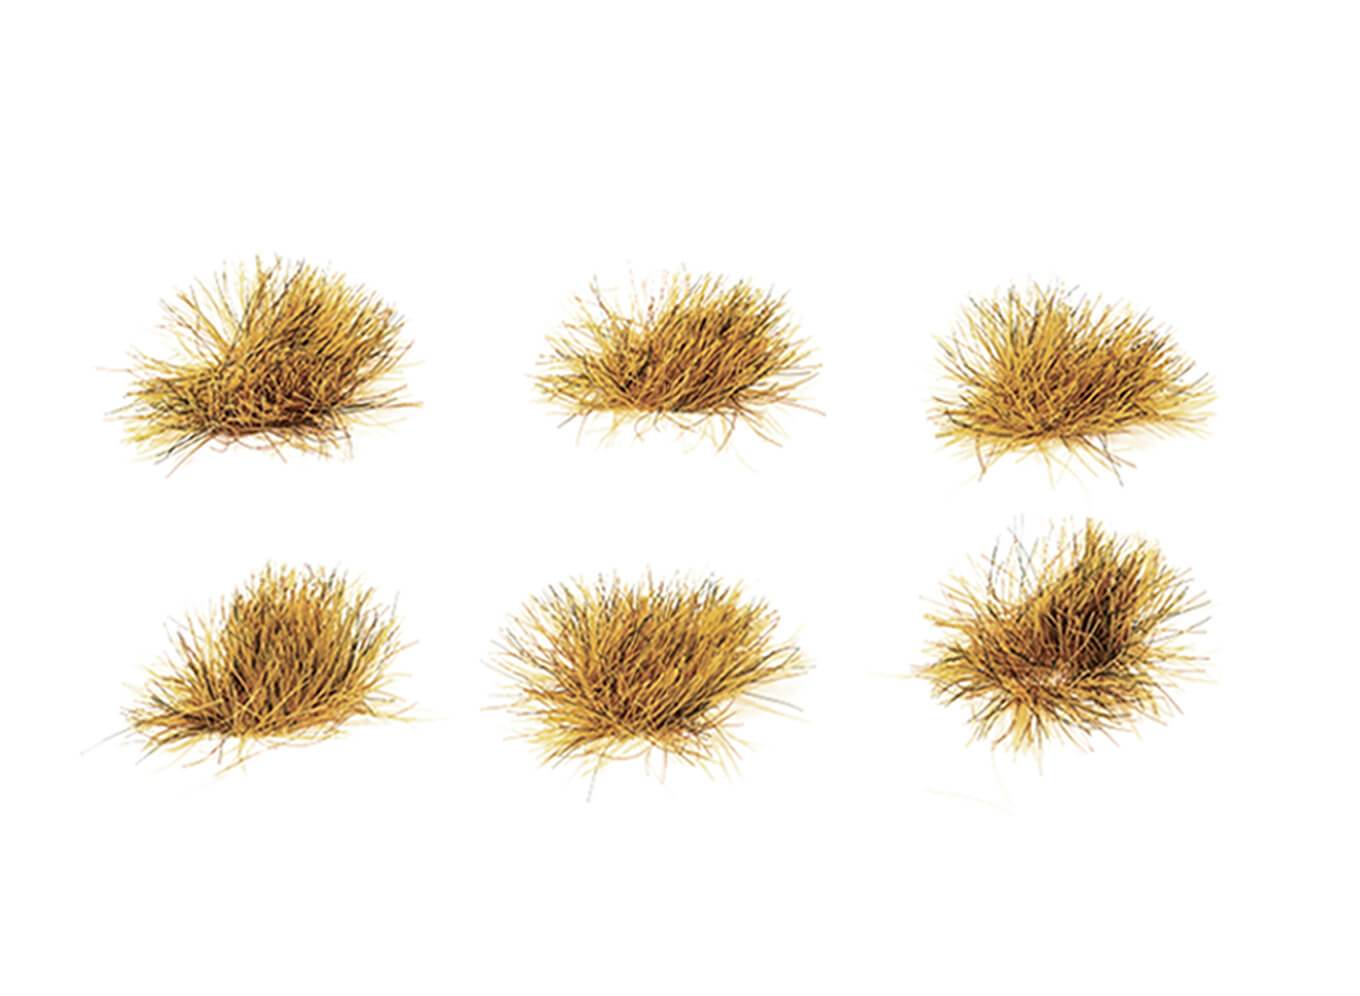 PSG-67 6mm Self Adhesive Wild Meadow Grass Tufts